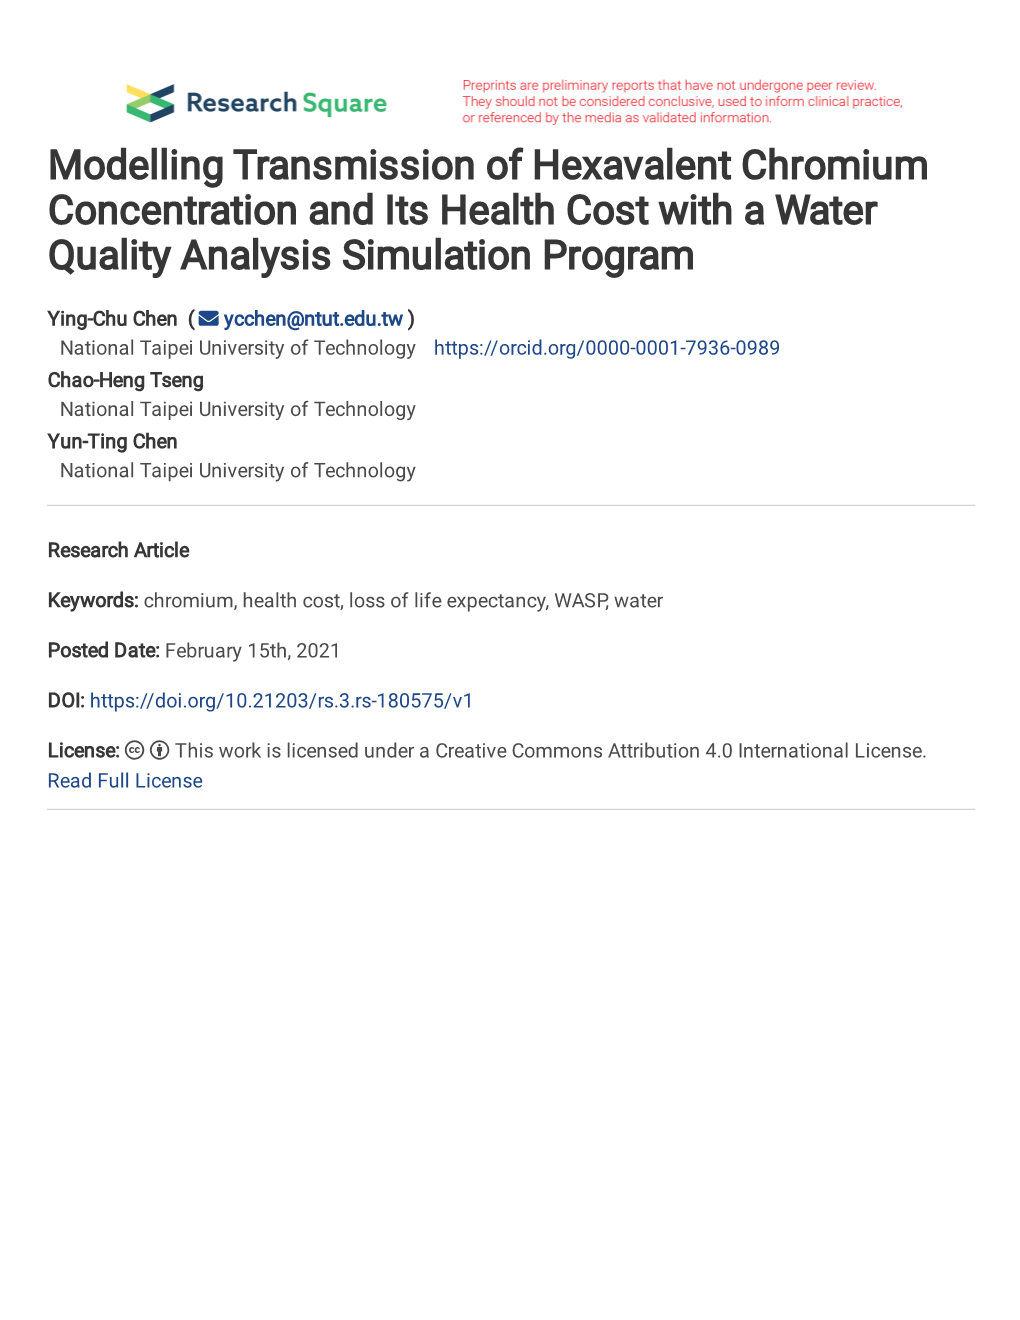 Modelling Transmission of Hexavalent Chromium Concentration and Its Health Cost with a Water Quality Analysis Simulation Program